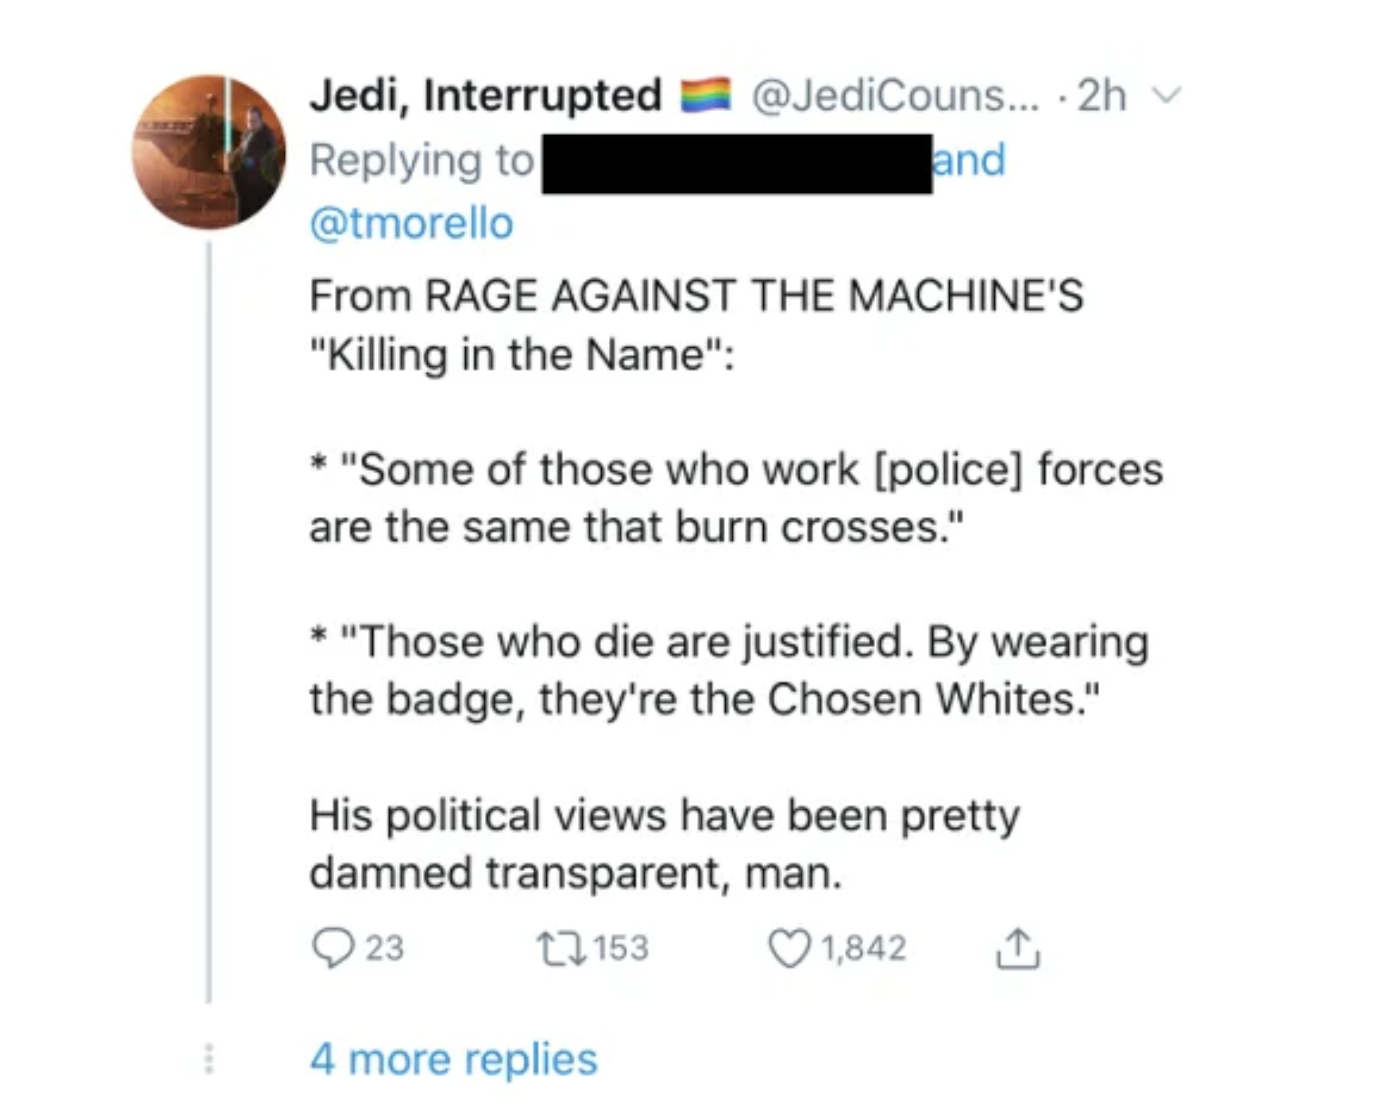 44+ Some Of Those Who Work Forces Are The Same That Burn Crosses Lyrics Gif